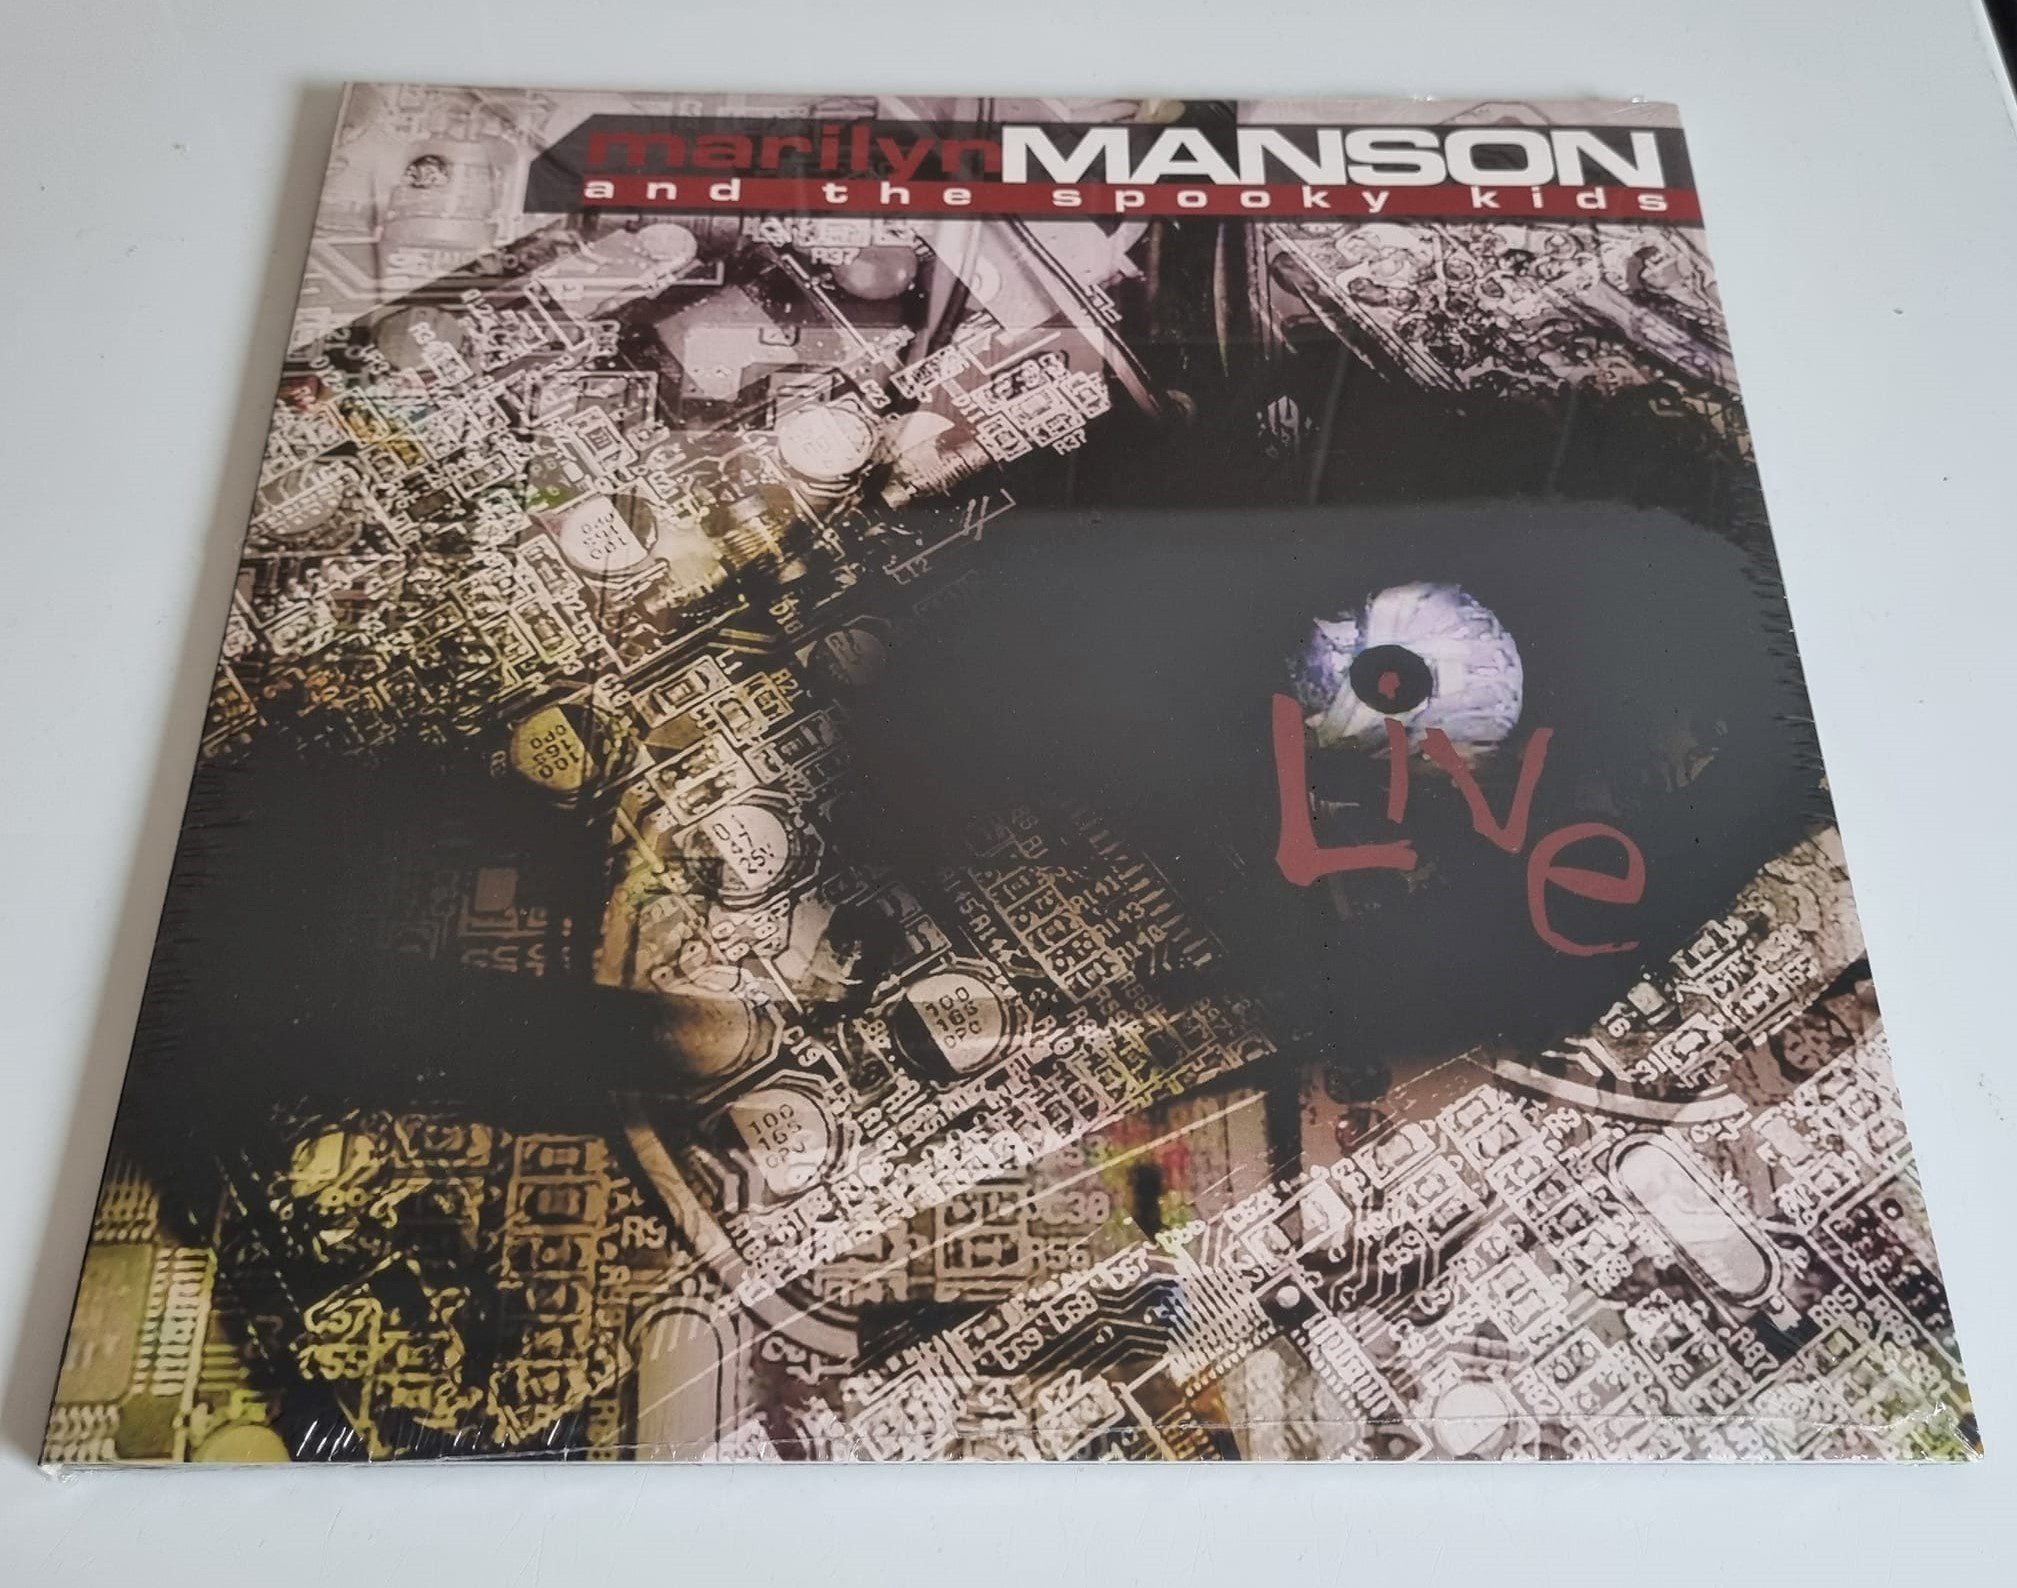 Buy this rare Marilyn Manson record by clicking here